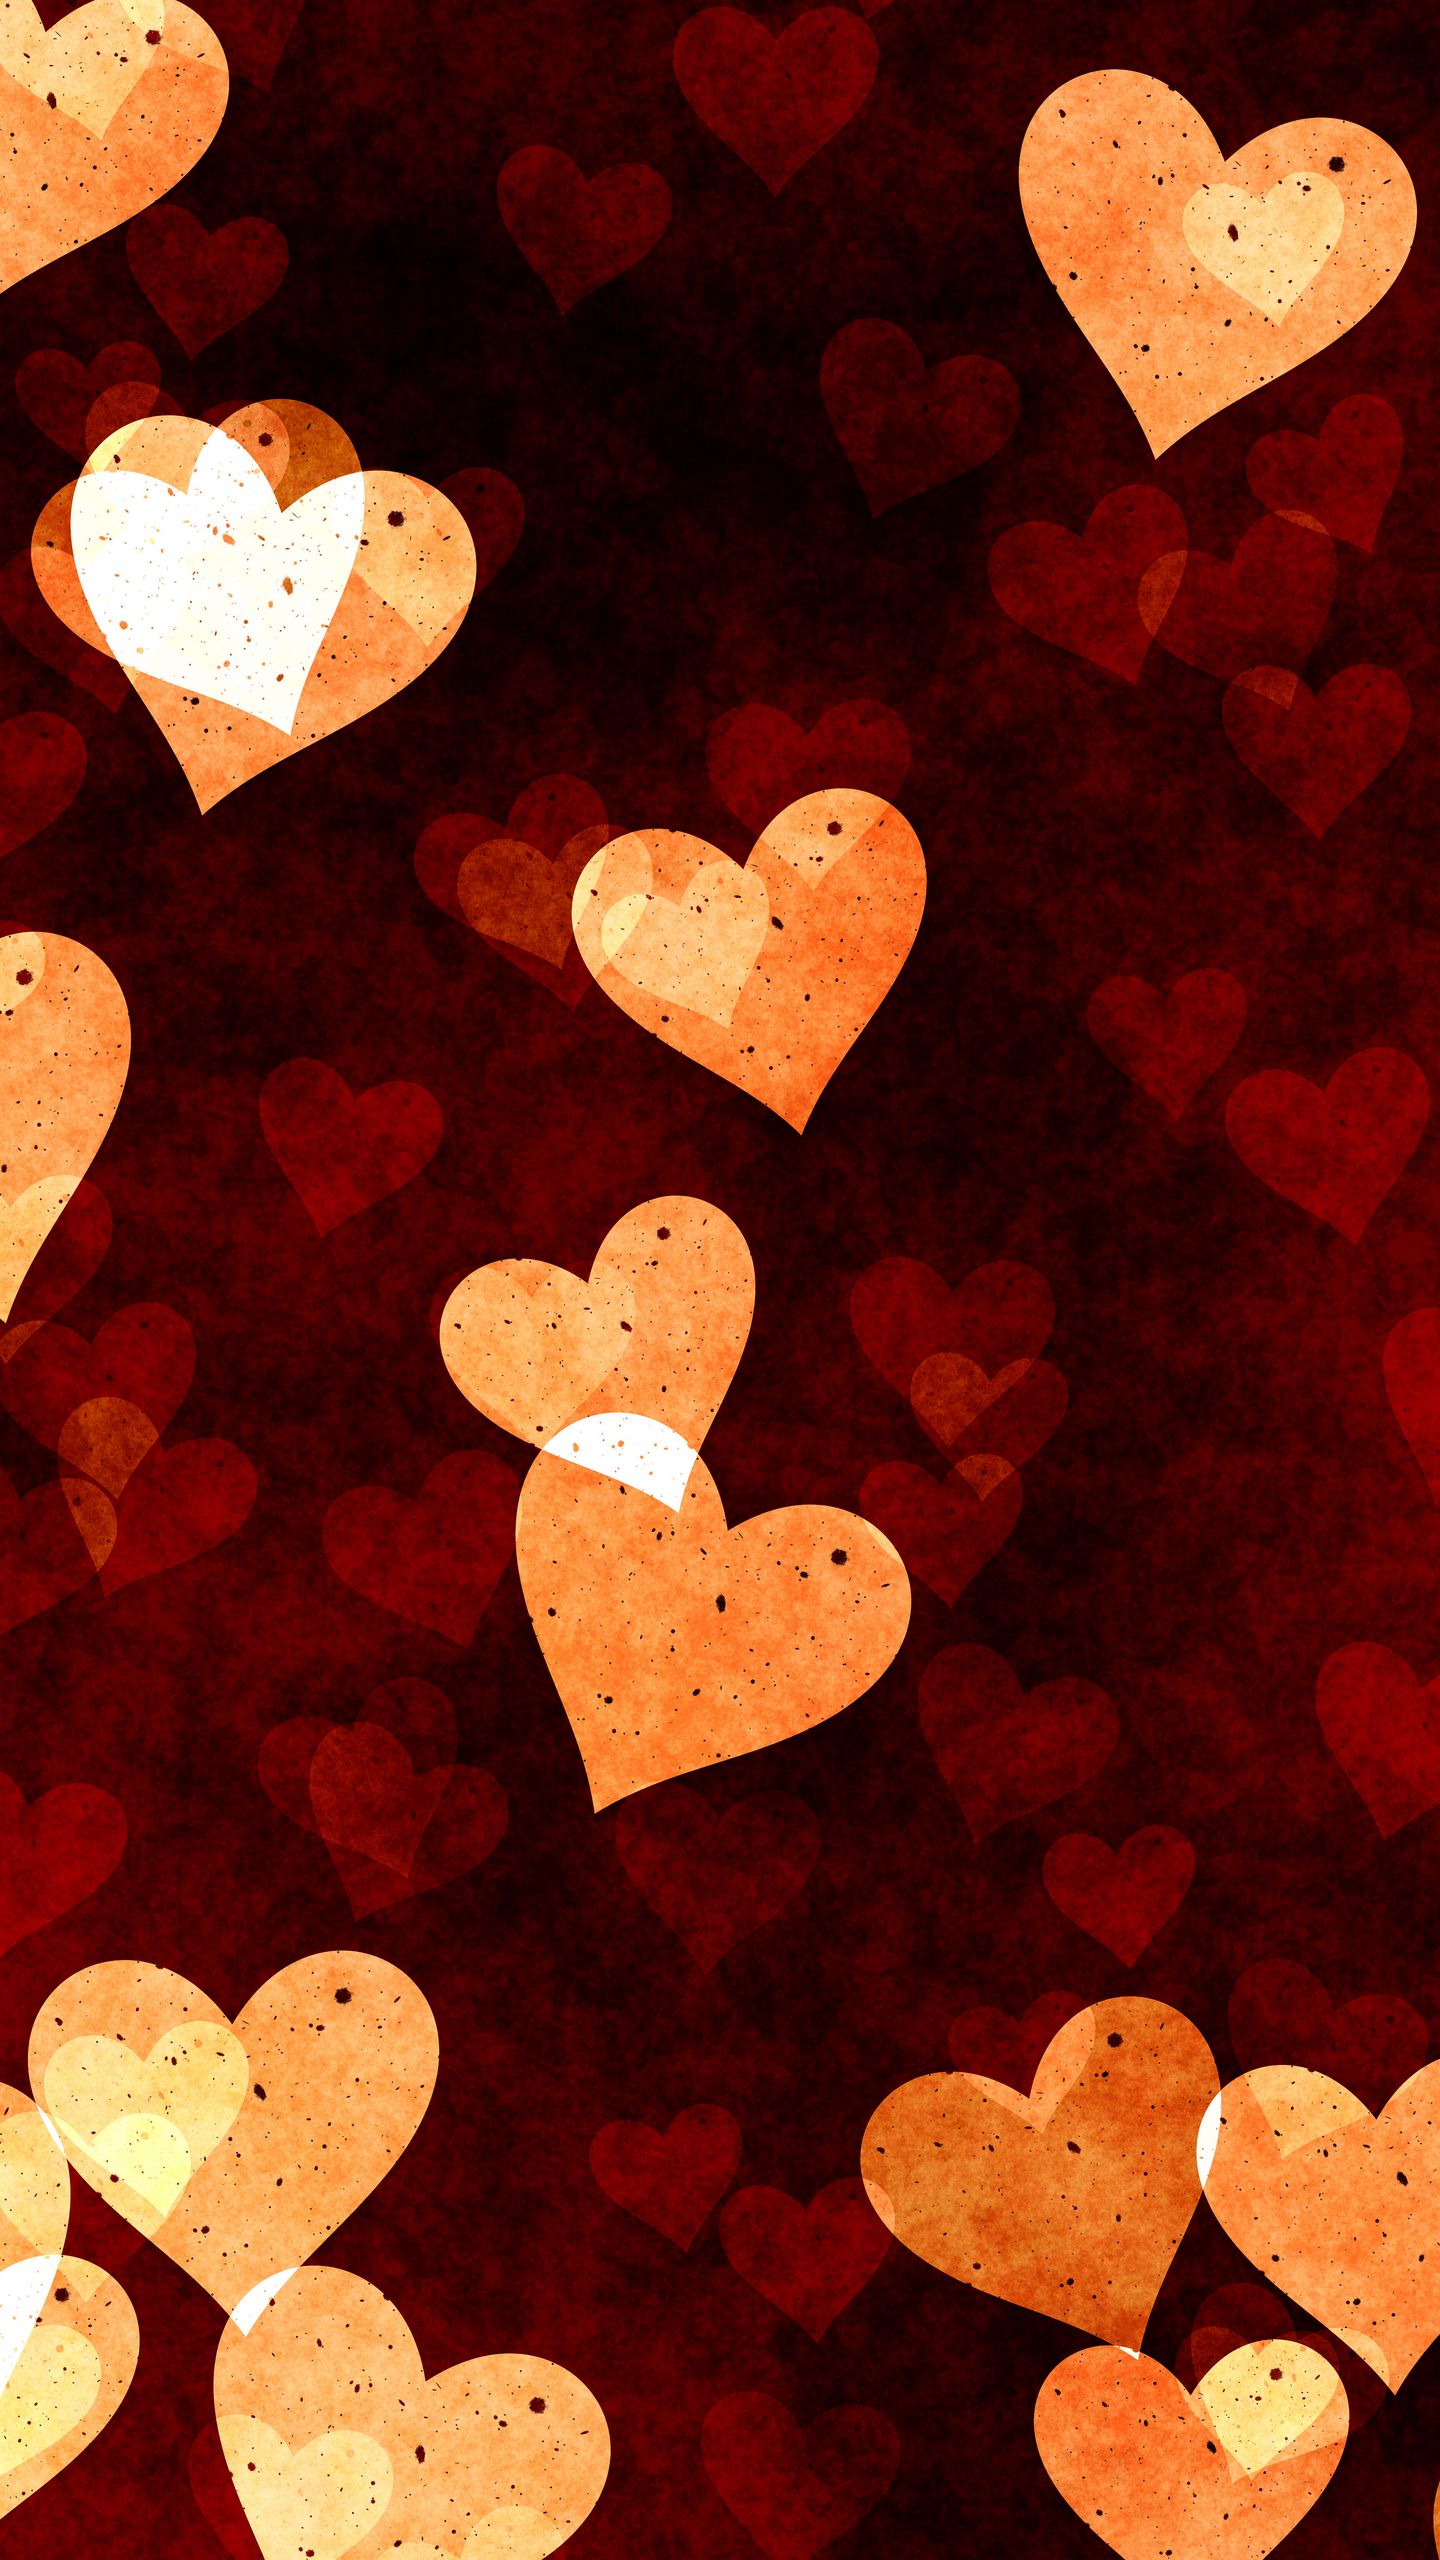 hearts_love_intersection_6319273